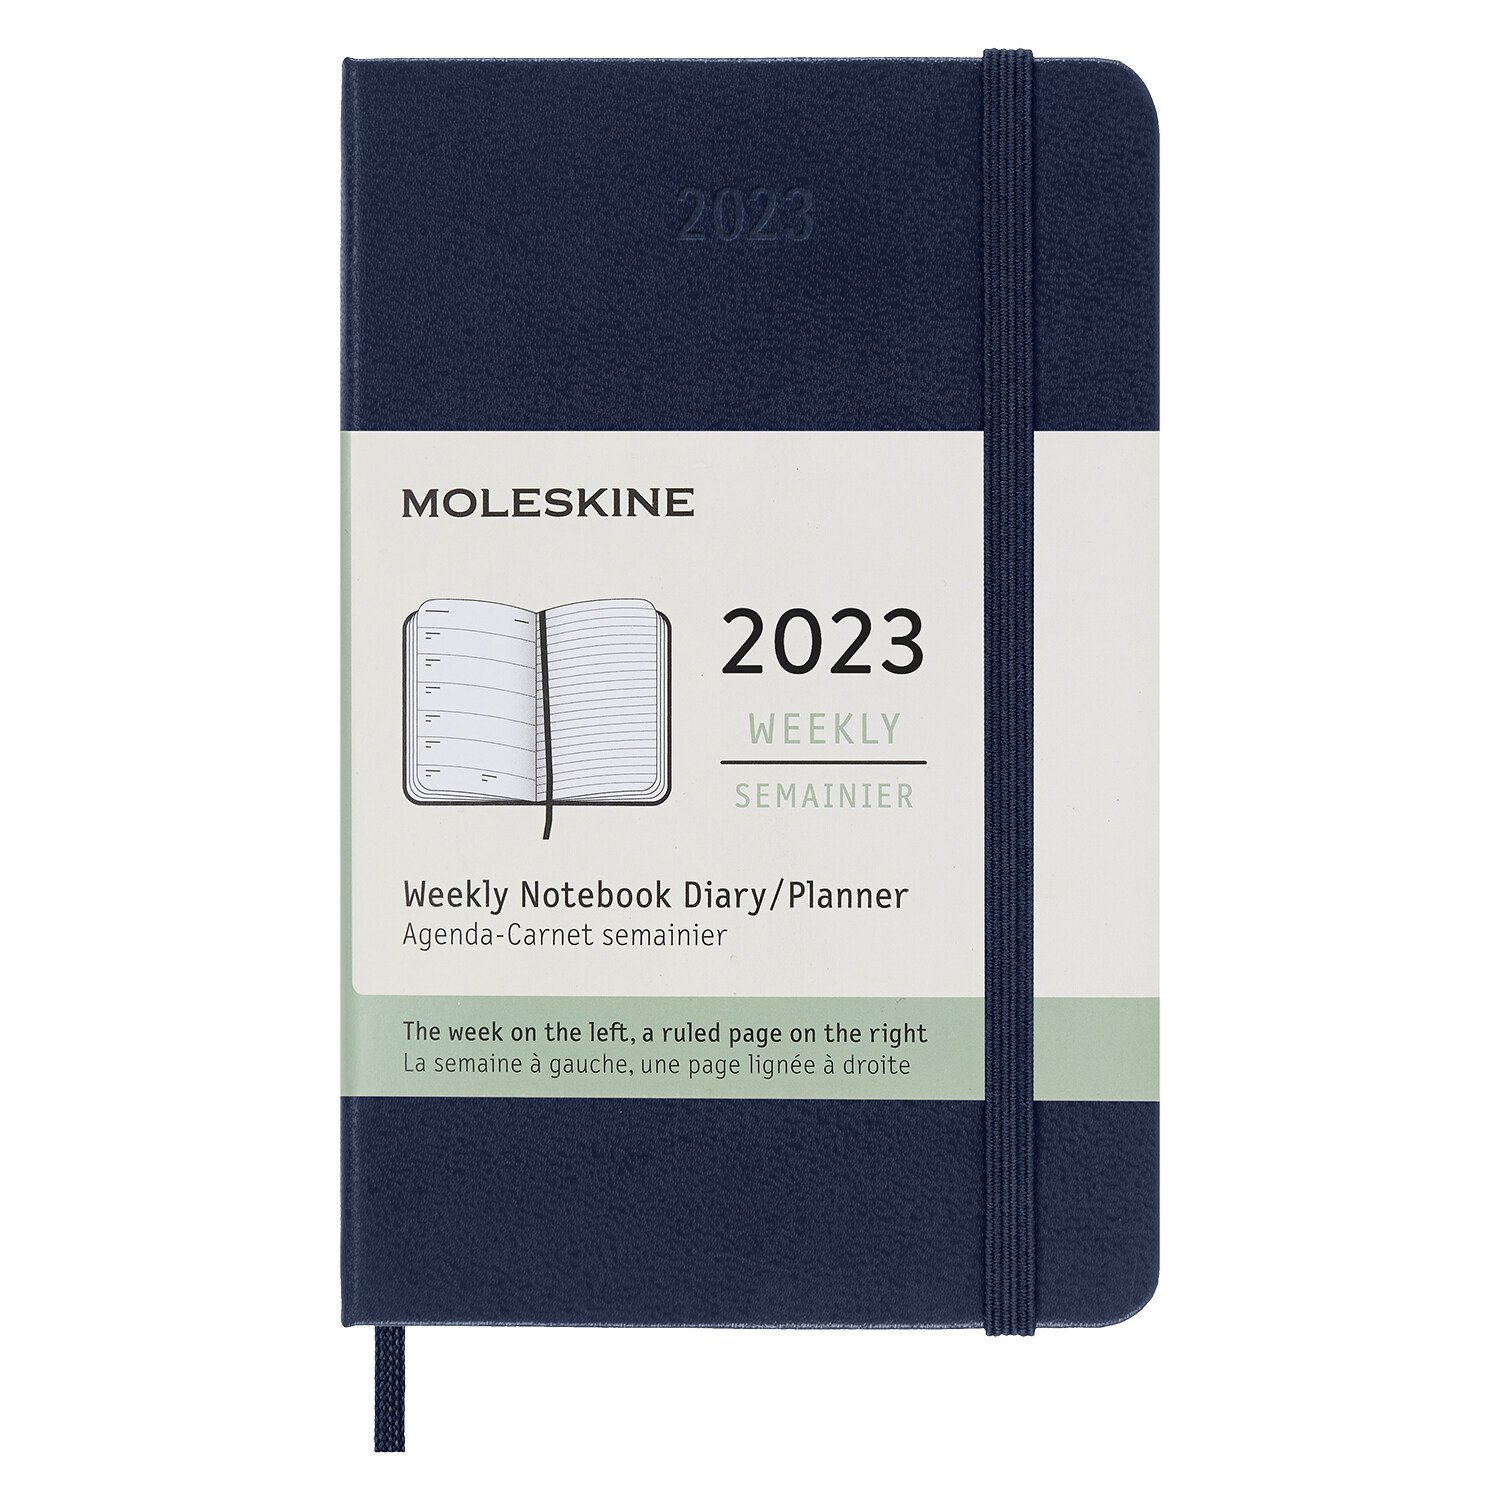 Moleskine 2023 Weekly Notebook Planner, 12m, Pocket, Saphire Blue, Hard Cover (3.5 X 5.5) (Other)